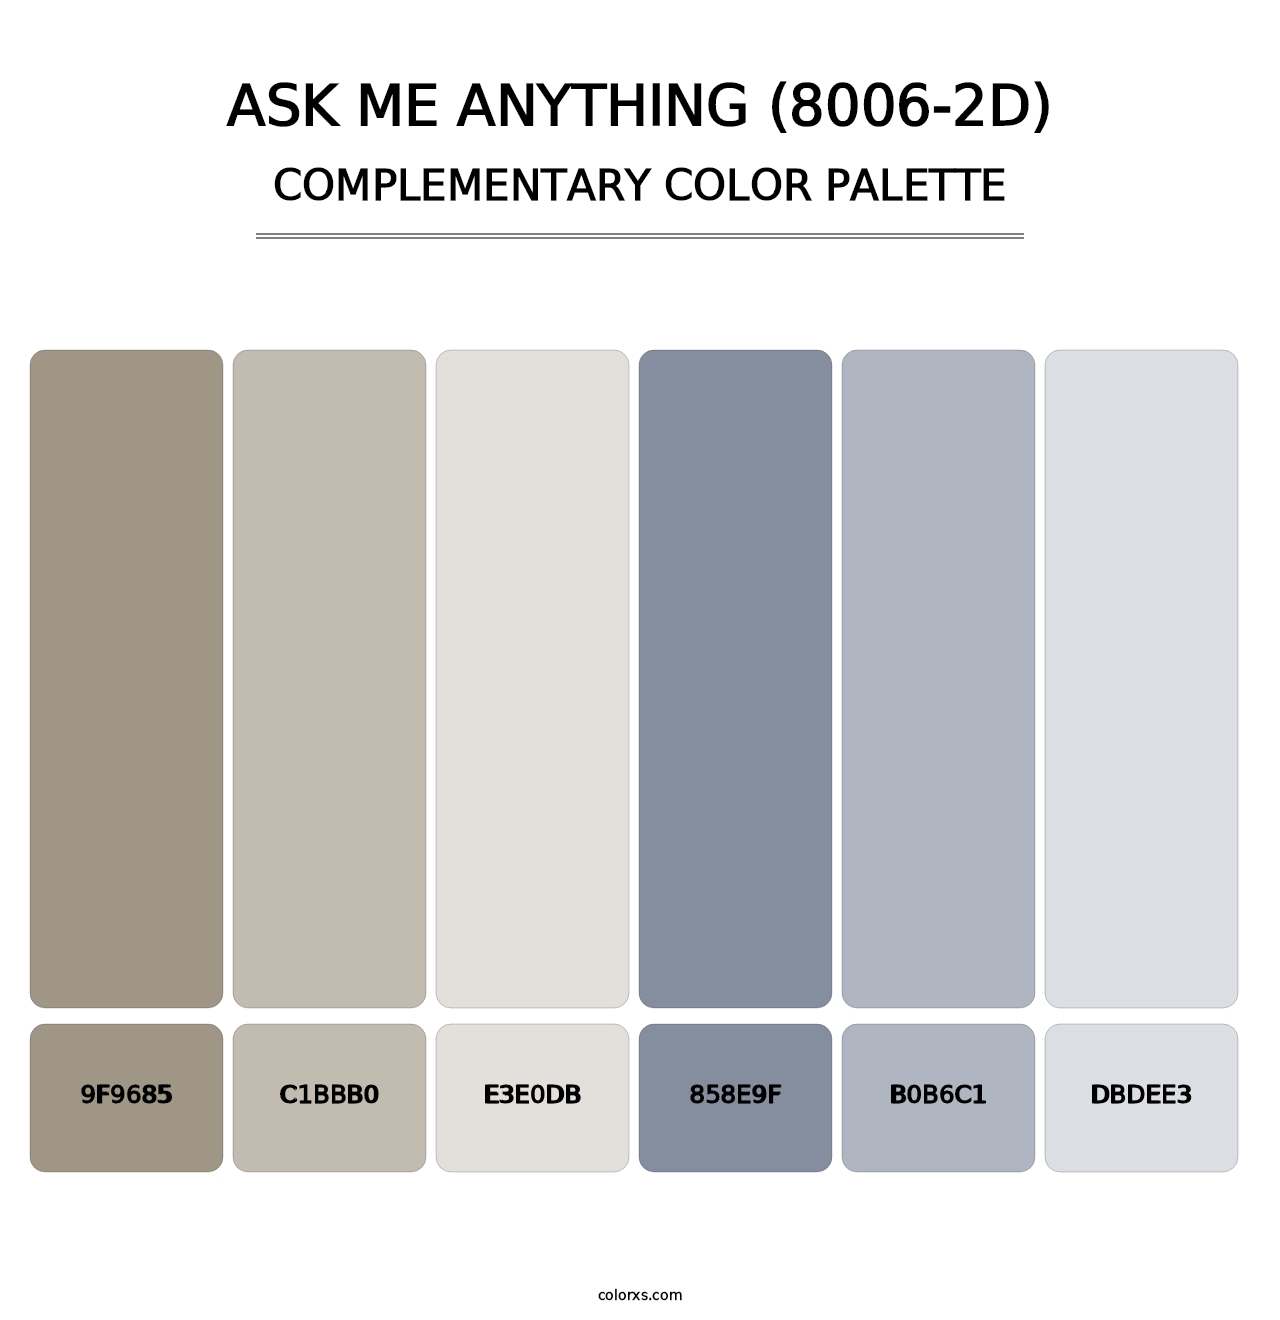 Ask Me Anything (8006-2D) - Complementary Color Palette